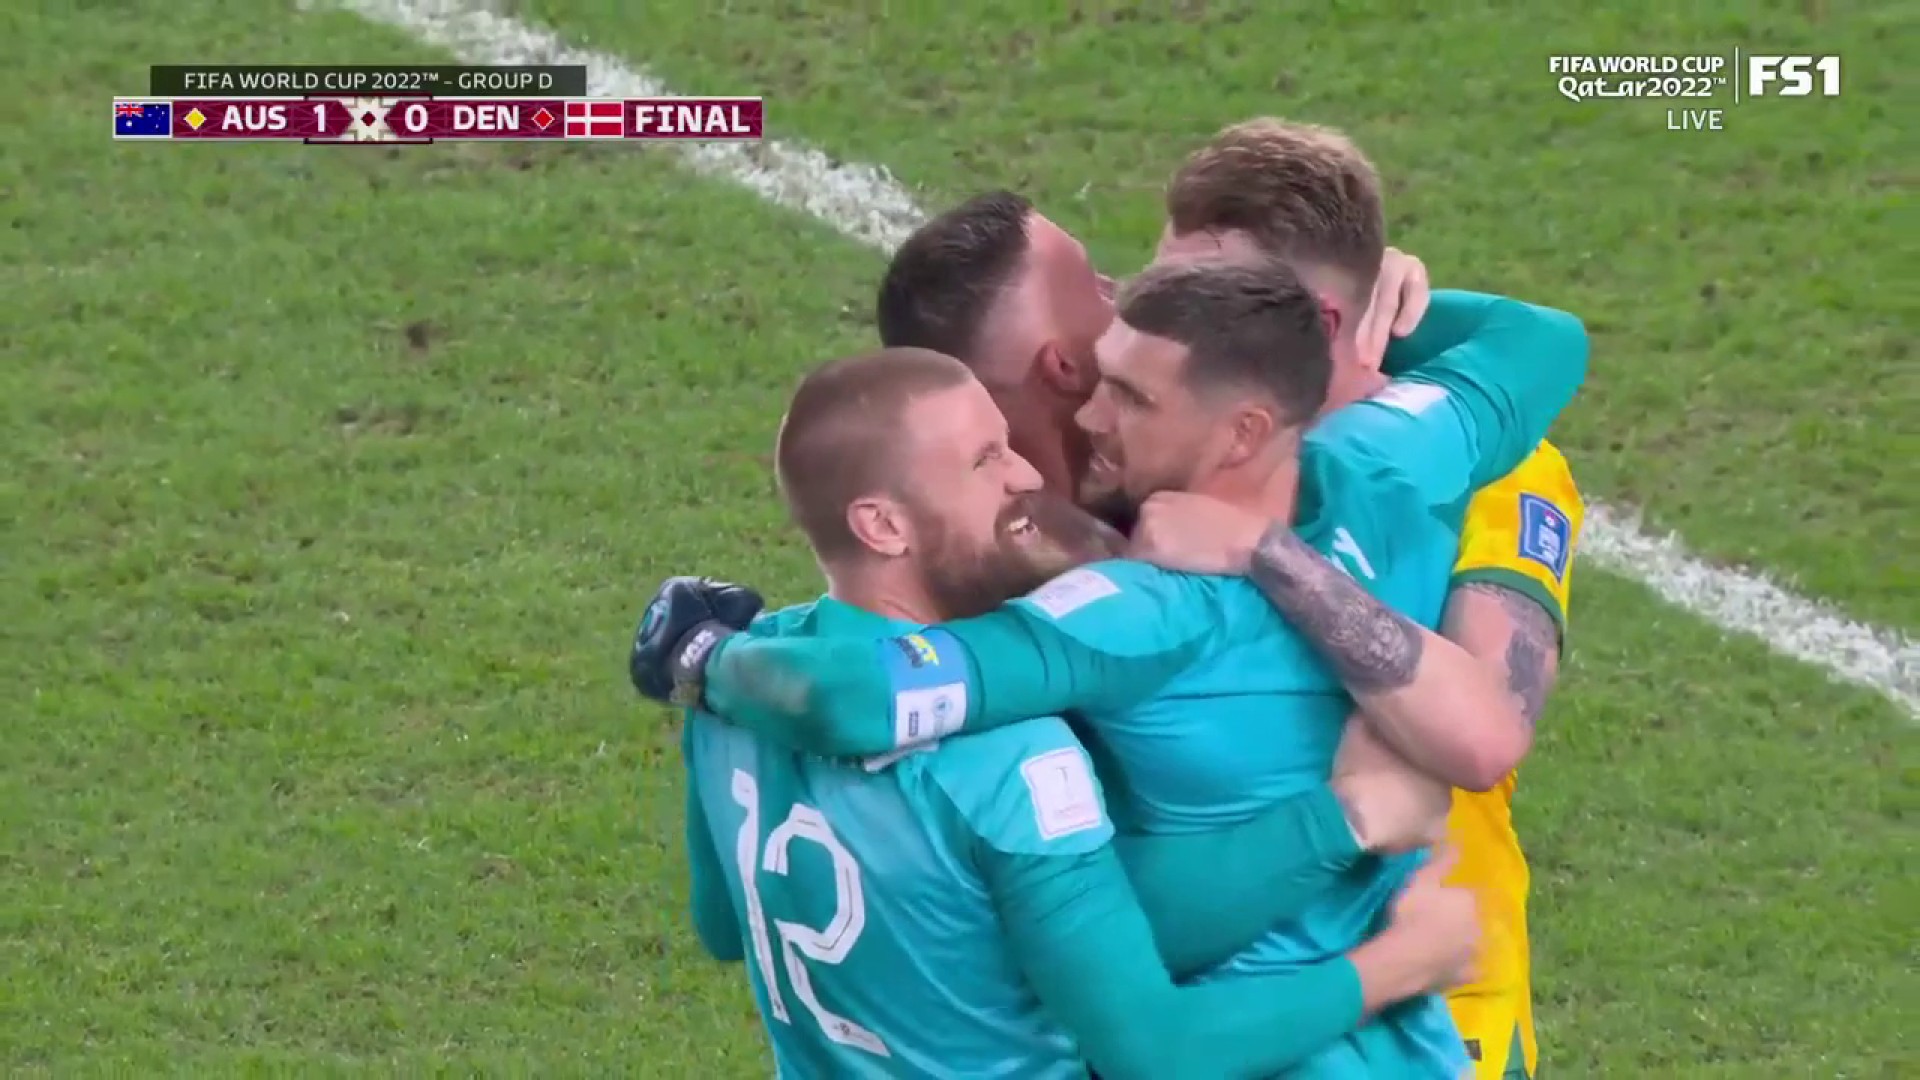 AUSTRALIA HAS DONE IT 🇦🇺👏

The @Socceroos advance to the knockout stage for the second time in their history”